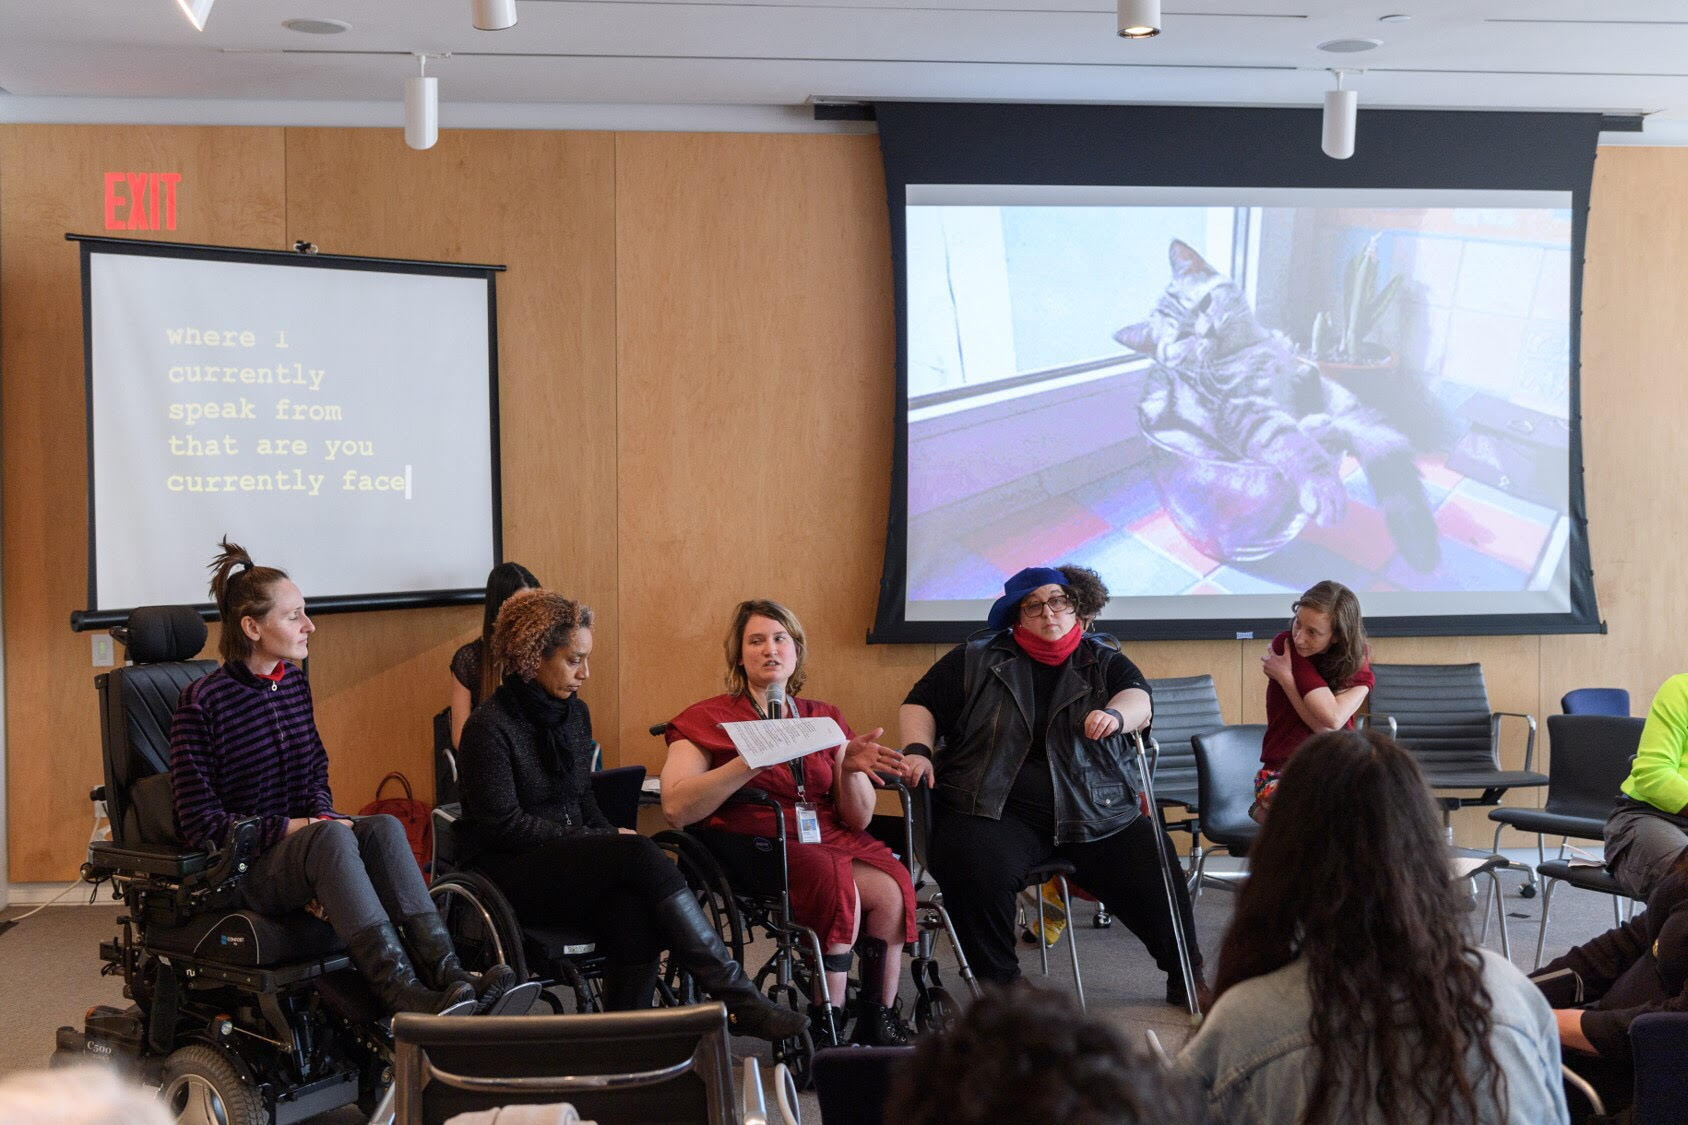  2019, The Whitney Museum hosted a day long conversation as part of and in collaboration with Performance Space's  I Wanna be with You Everywhere.  Featured in the image are Park McArthur, Alice Sheppard, Madison Zalopany, Constantina Zavitsanos, and